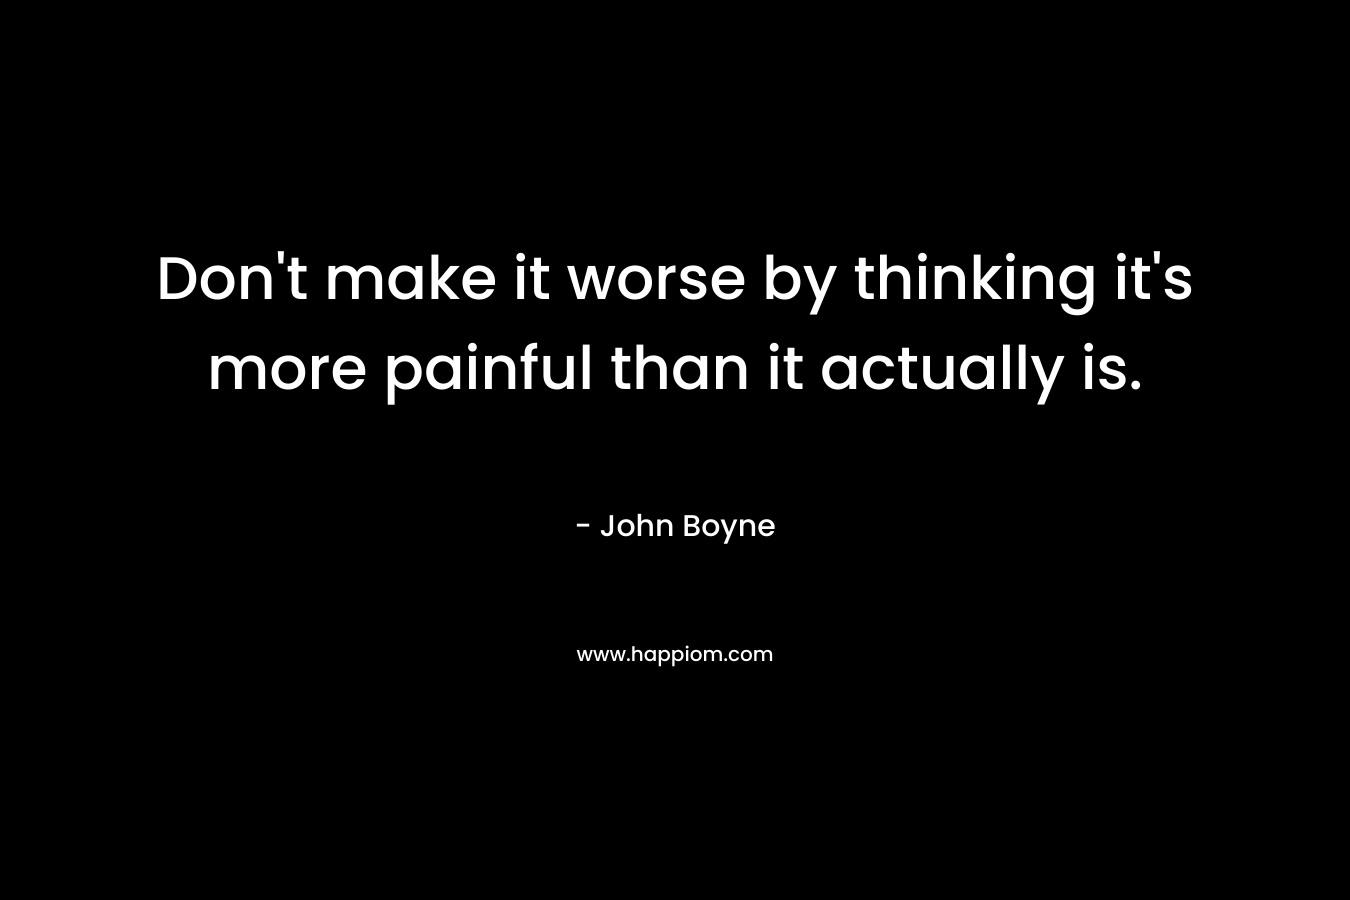 Don't make it worse by thinking it's more painful than it actually is.